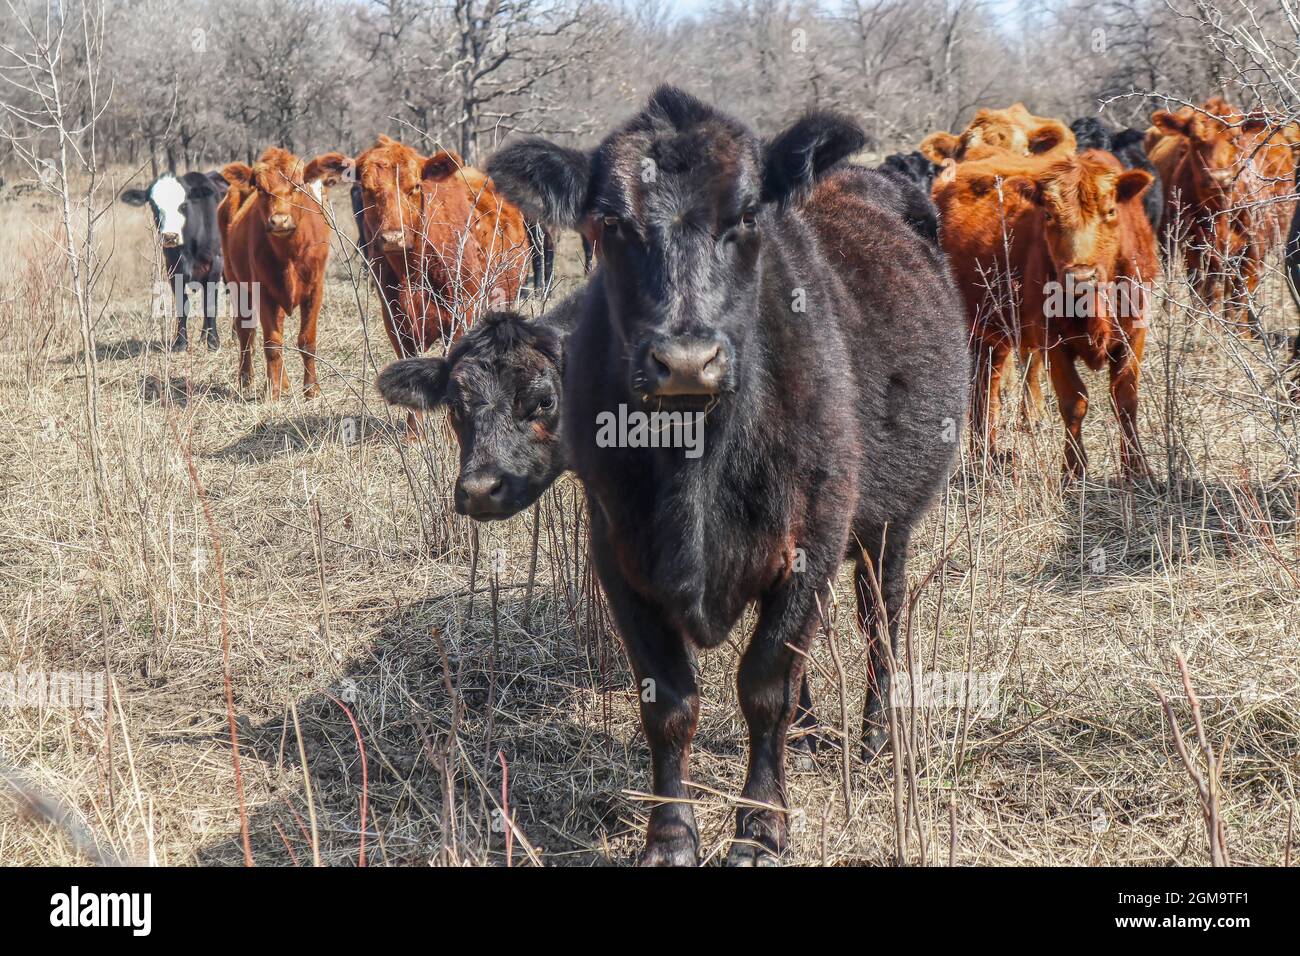 Young black cow with rest of herd behind staring suspiciously into camera out in winter field - they look like they are up to no good  or are angry - Stock Photo